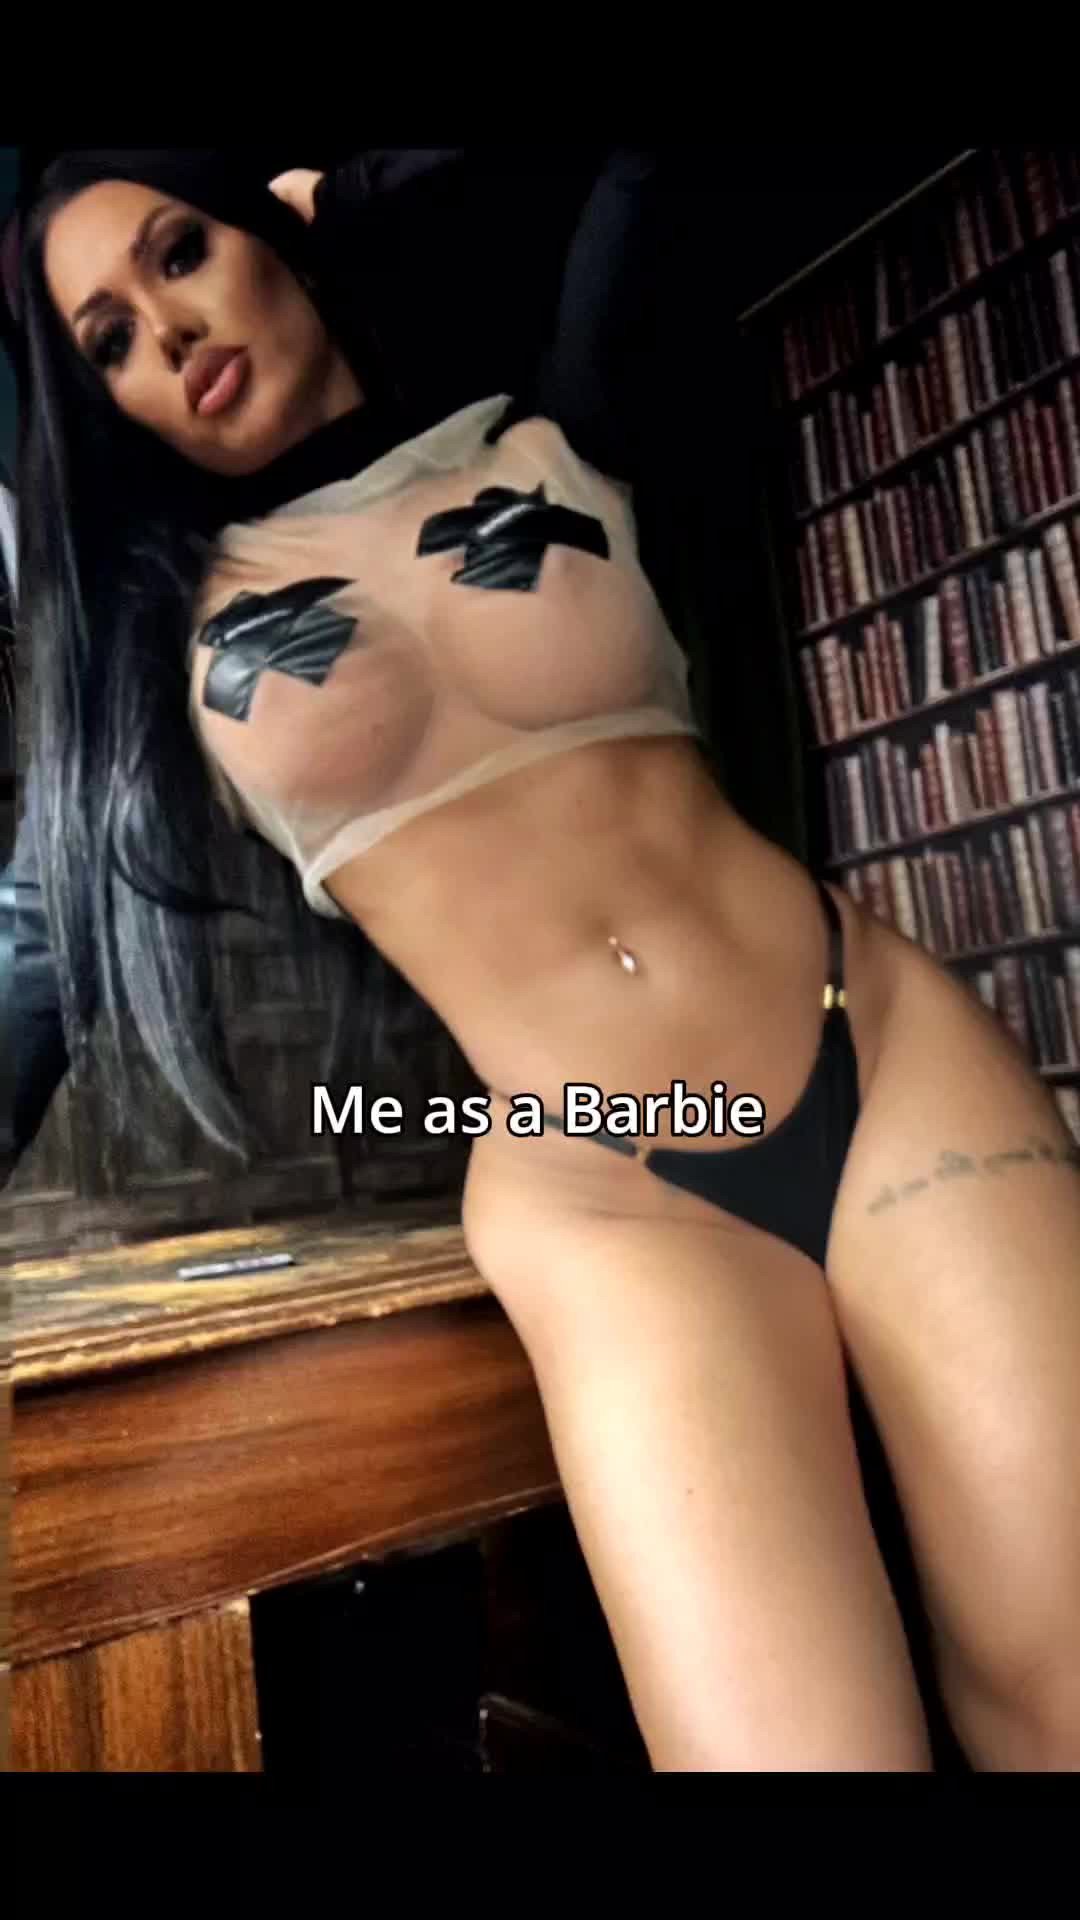 Video by NattashaBlack with the username @NattashaBlack, who is a star user,  August 19, 2023 at 5:34 PM. The post is about the topic MILF and the text says 'Darkest Barbie for your dreams 🖤✔️

https://onlyfans.com/nattashablack

#dominatrix #prodomme #femdom #bondage #bdsm #peg #ass #bottom #breathplay #consent #aftercare #drop #dungeon #edgeplay #fetish #fetish #genderplay #hardlimits #impactplay #kink..'